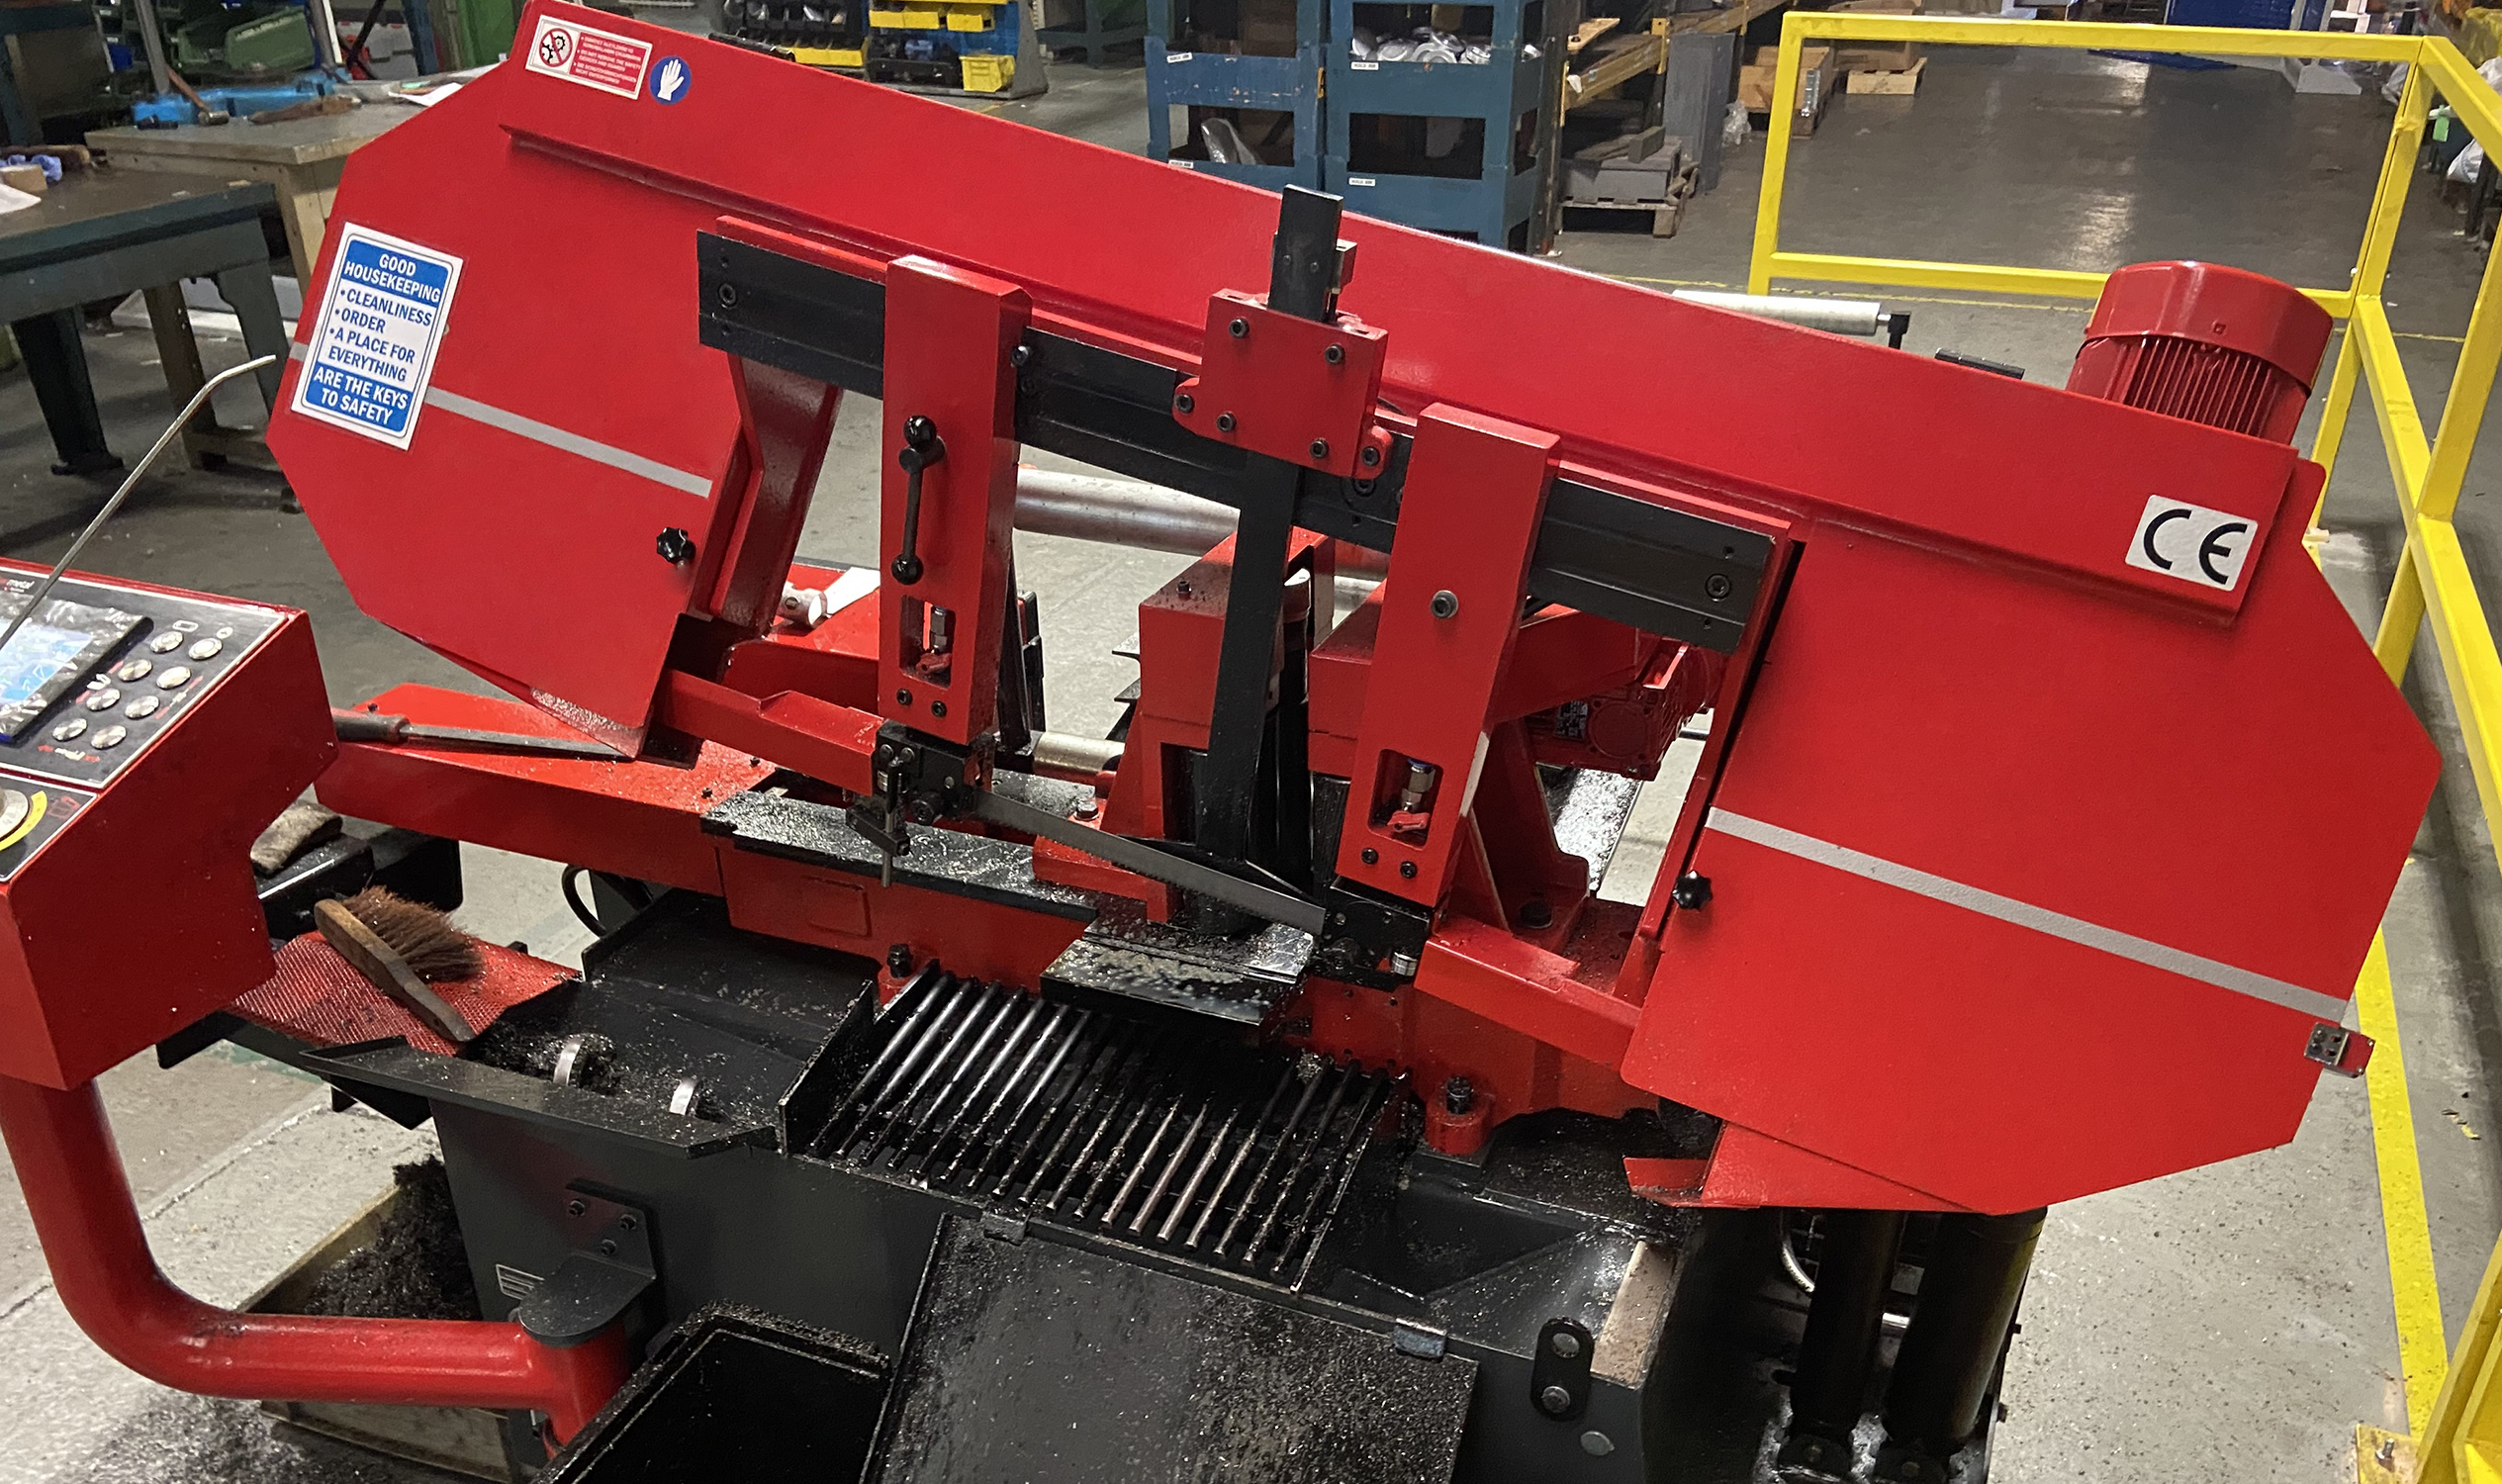 New band saw from WDS Components marks a significant improvement in its manufacturing processes.